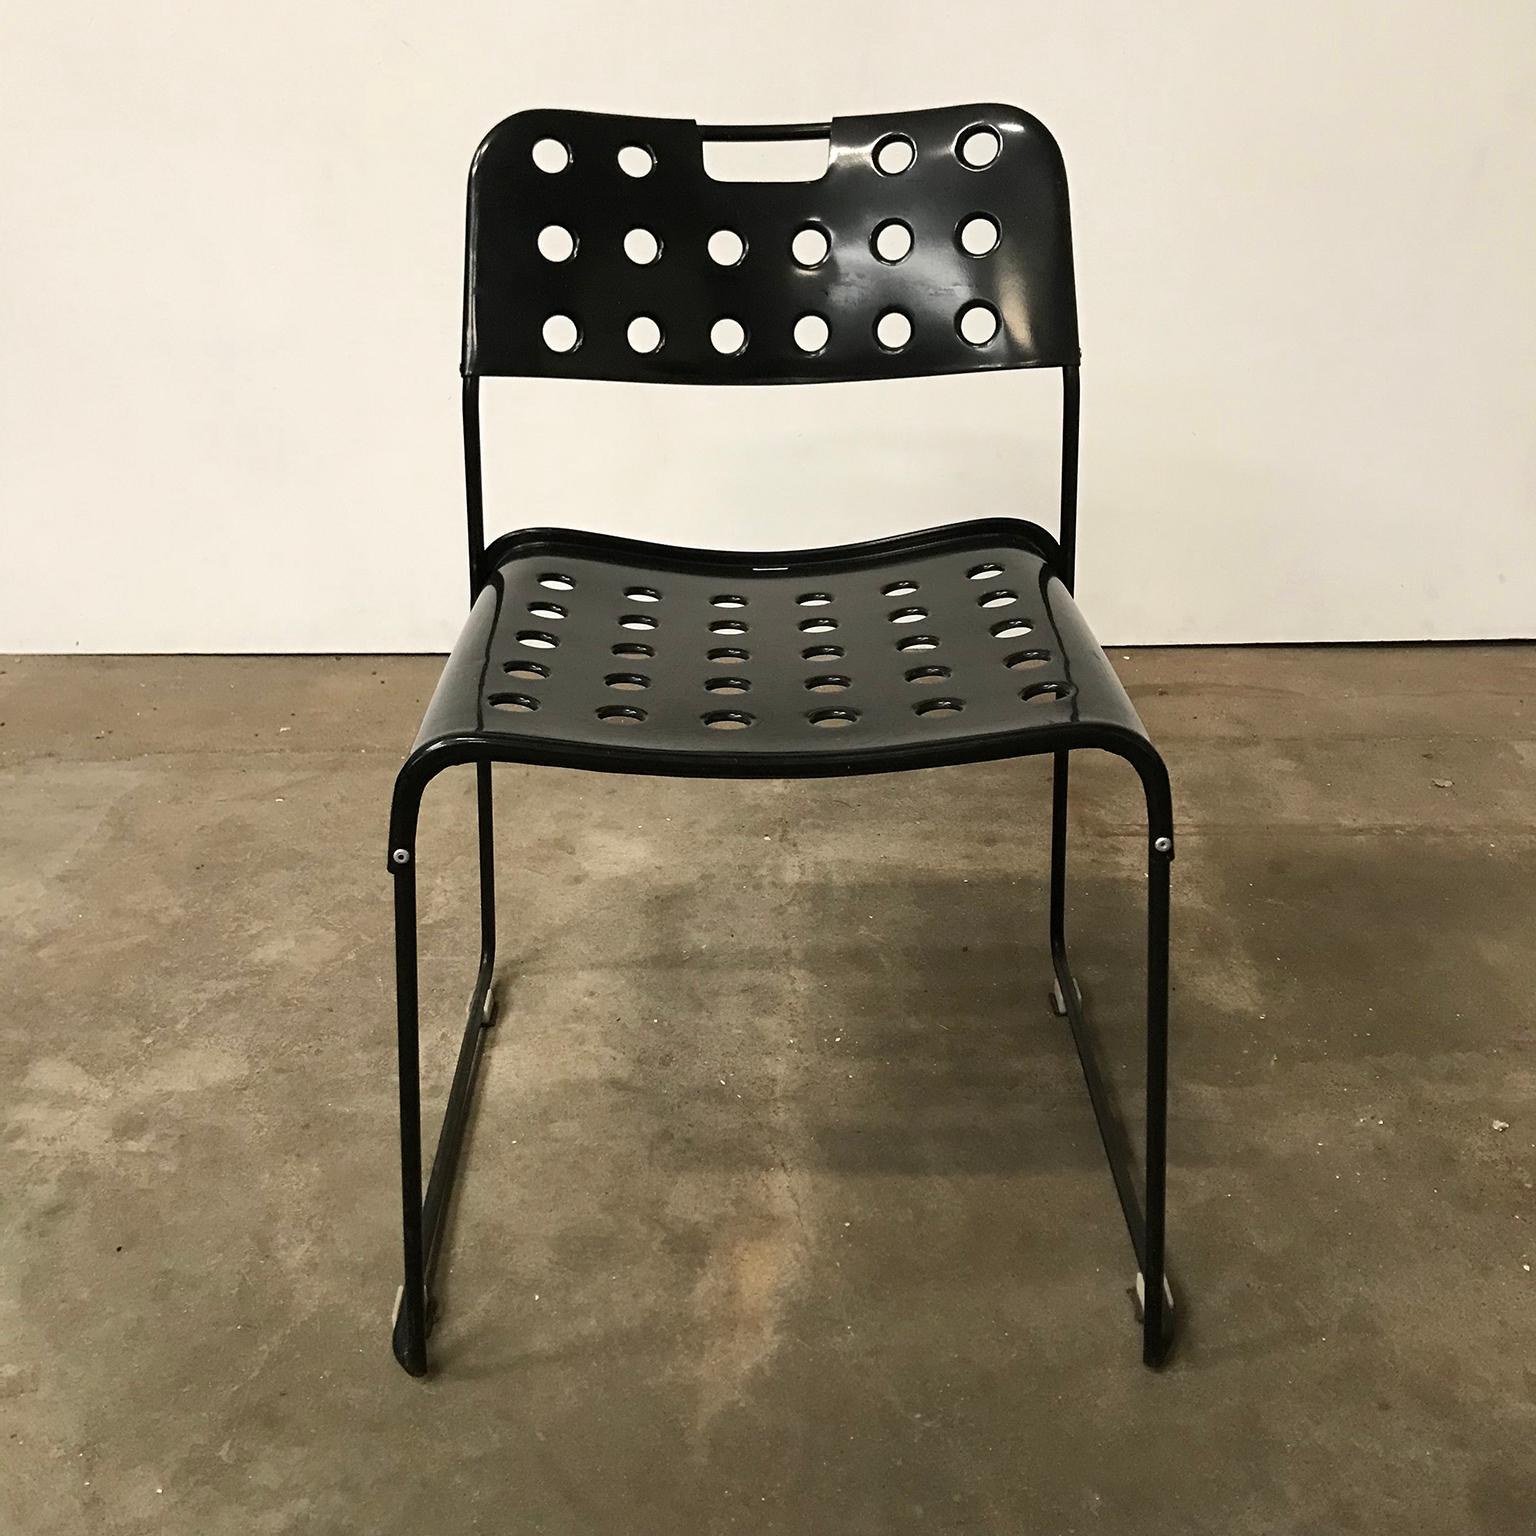 1971, Rodney Kinsman, Set of Rare All Black, Incl. Frame, Omstak Stacking Chairs 2